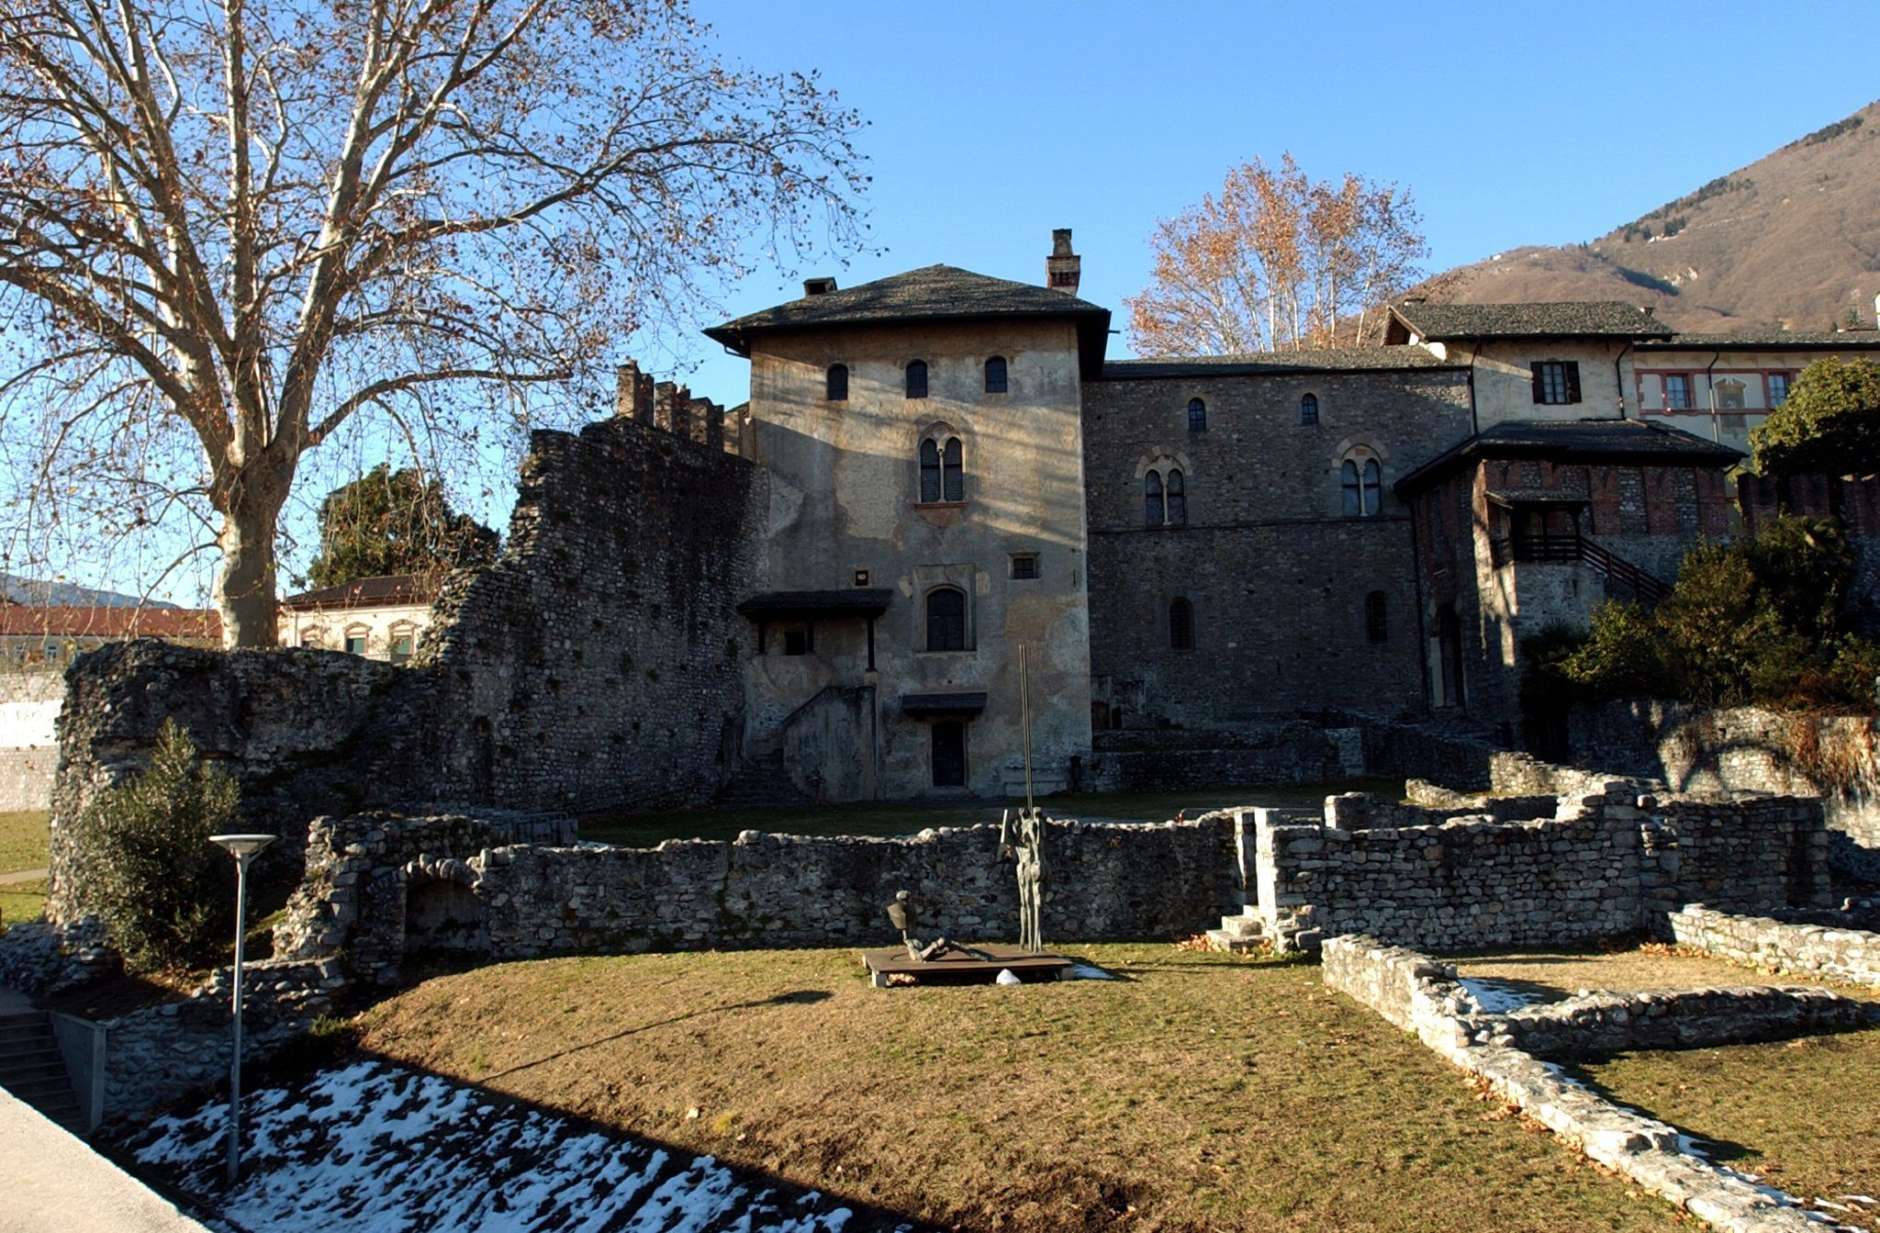 The Castle of Locarno, southern Switzerland is pictured, Tuesday, Jan. 4, 2005. Only a small part of the original stronghold, the old wall at left, is visible. Italian military architecture historian Marino Vigano assumes, that it could have been the italian universal genius Leonardo da Vinci, who worked also as military architect from 1478 to 1506 for different regents, who designed the stronghold of the Castle of Locarno, southern Switzerland, as Swiss newspaper "Tages-Anzeiger" reported Tuesday. Vigano has no direct proof for his theory, but strong evidence. It would be the last existing building conceptualized by Leonardo da Vinci, if Vigano's theory proves true.  (AP Photo/Keystone, Karl Mathis)